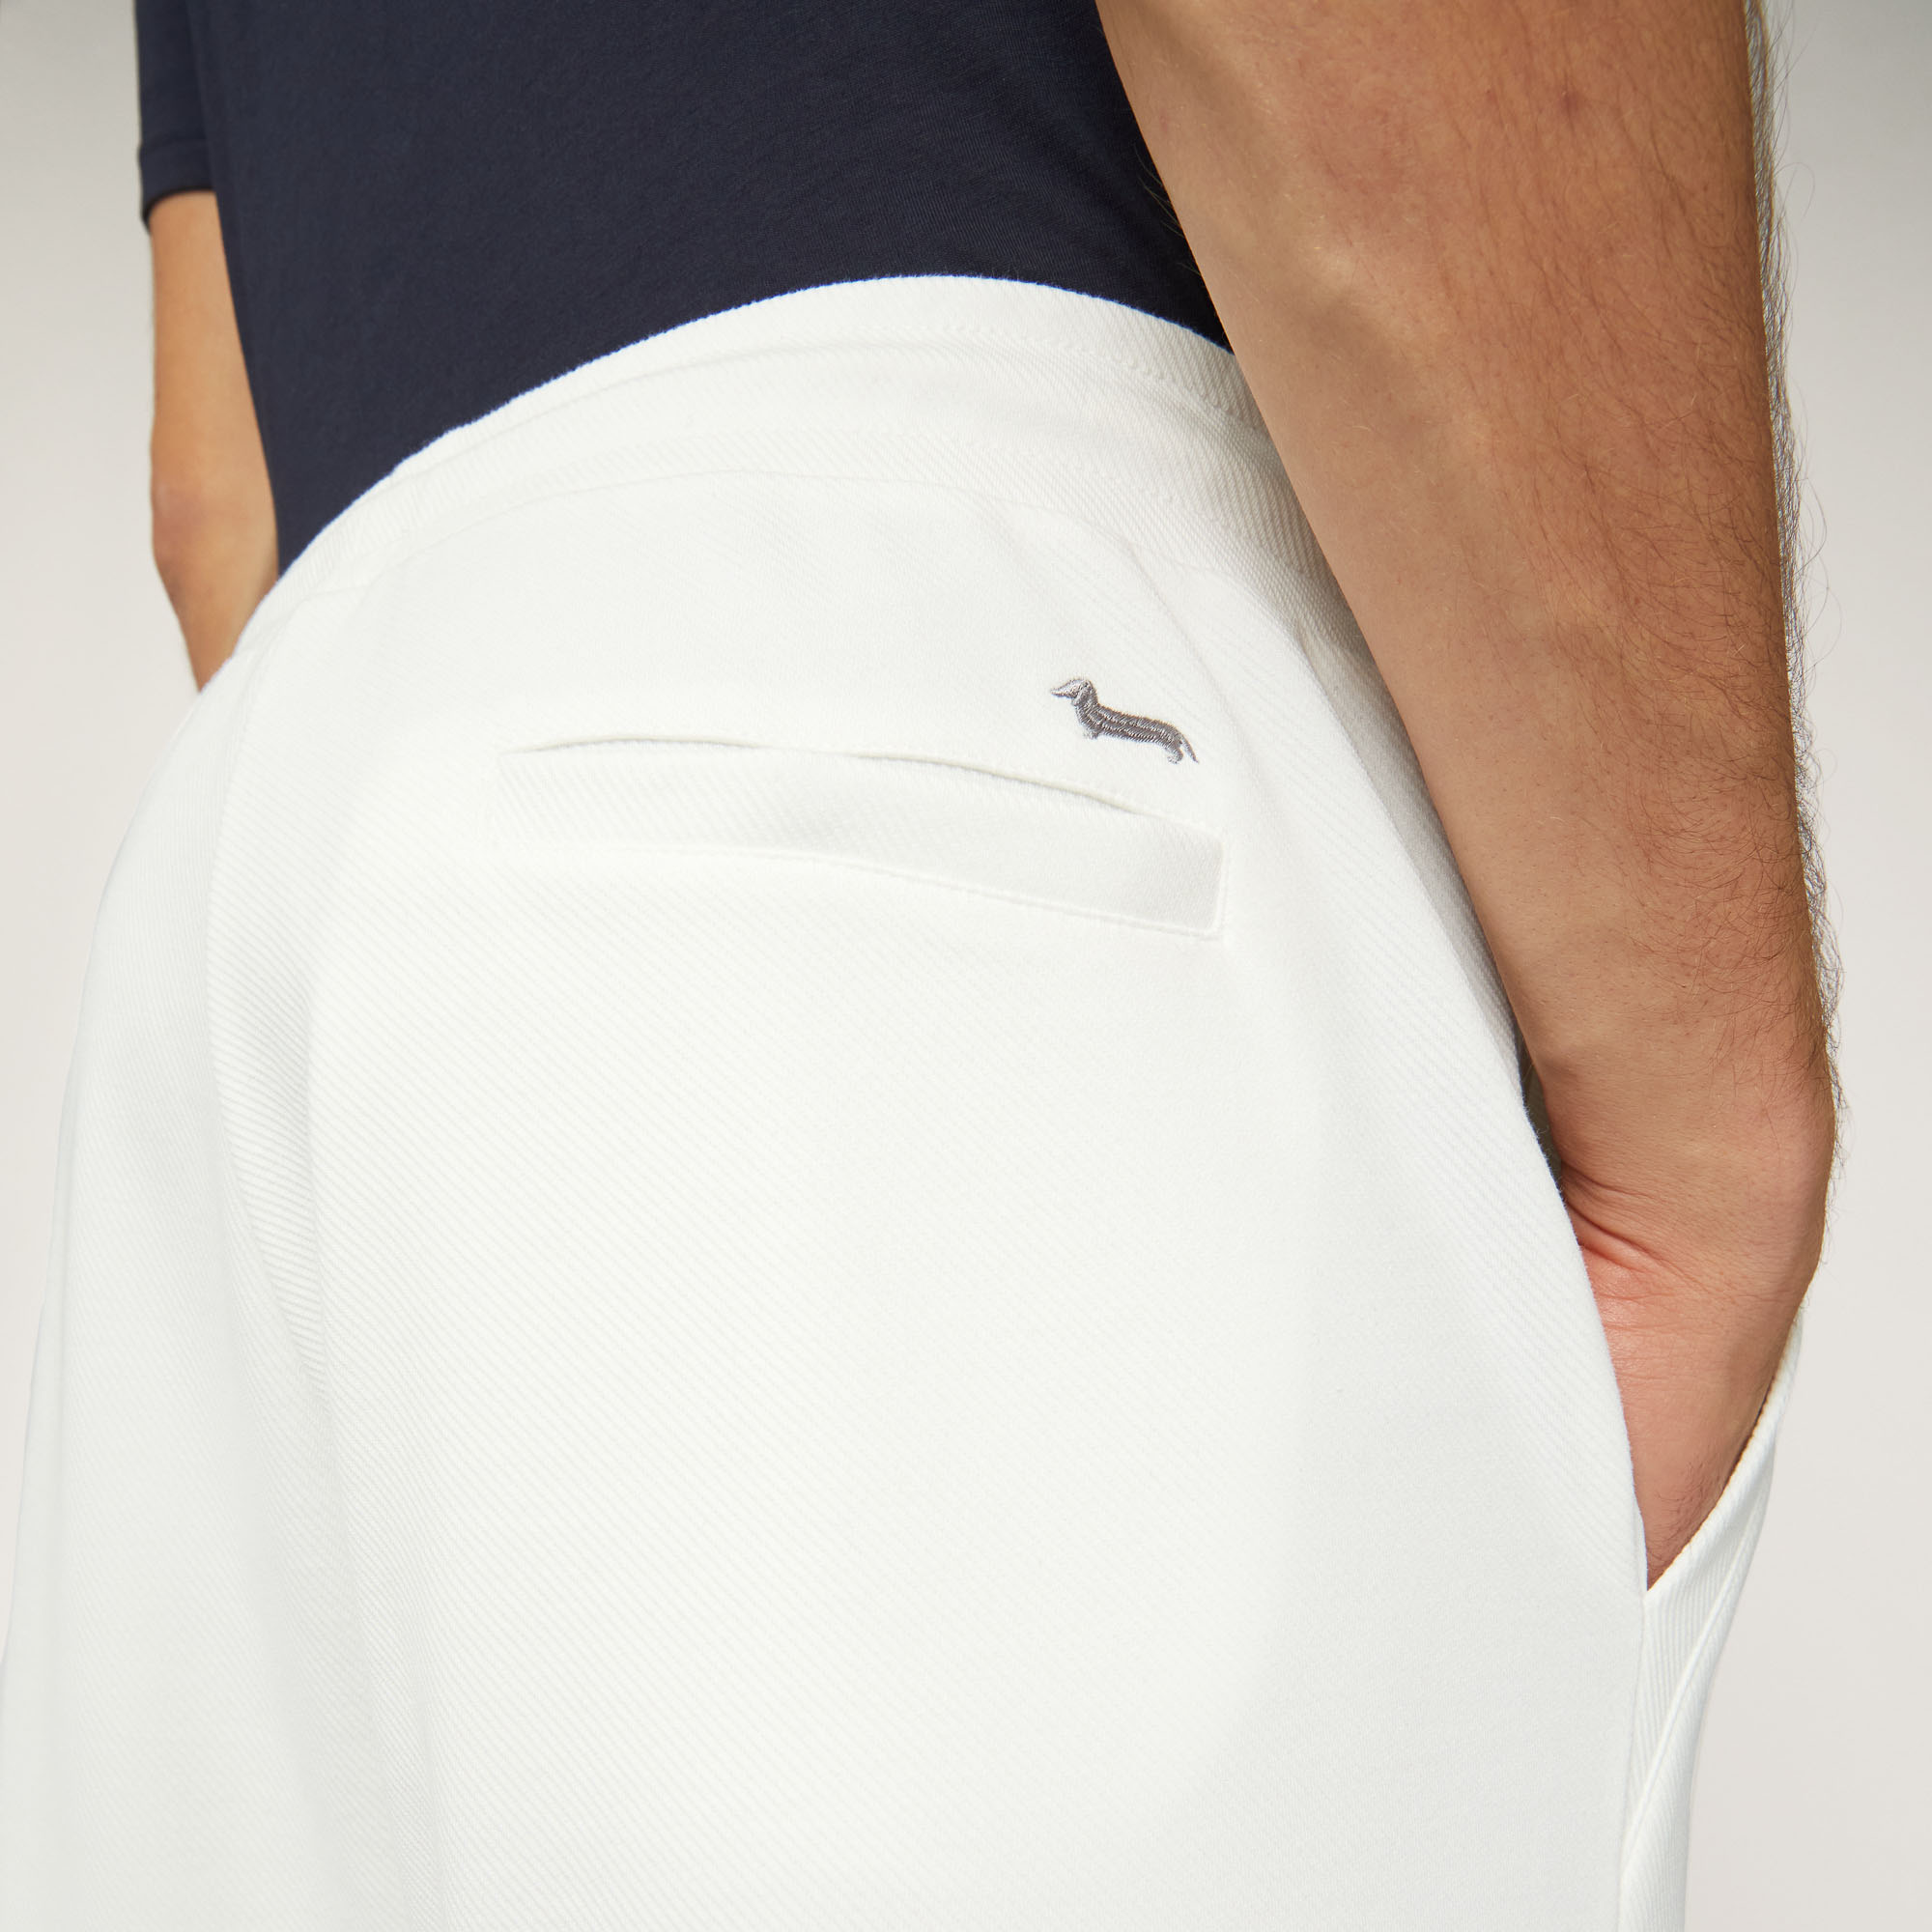 Stretch Cotton Pants with Back Pocket, White, large image number 2